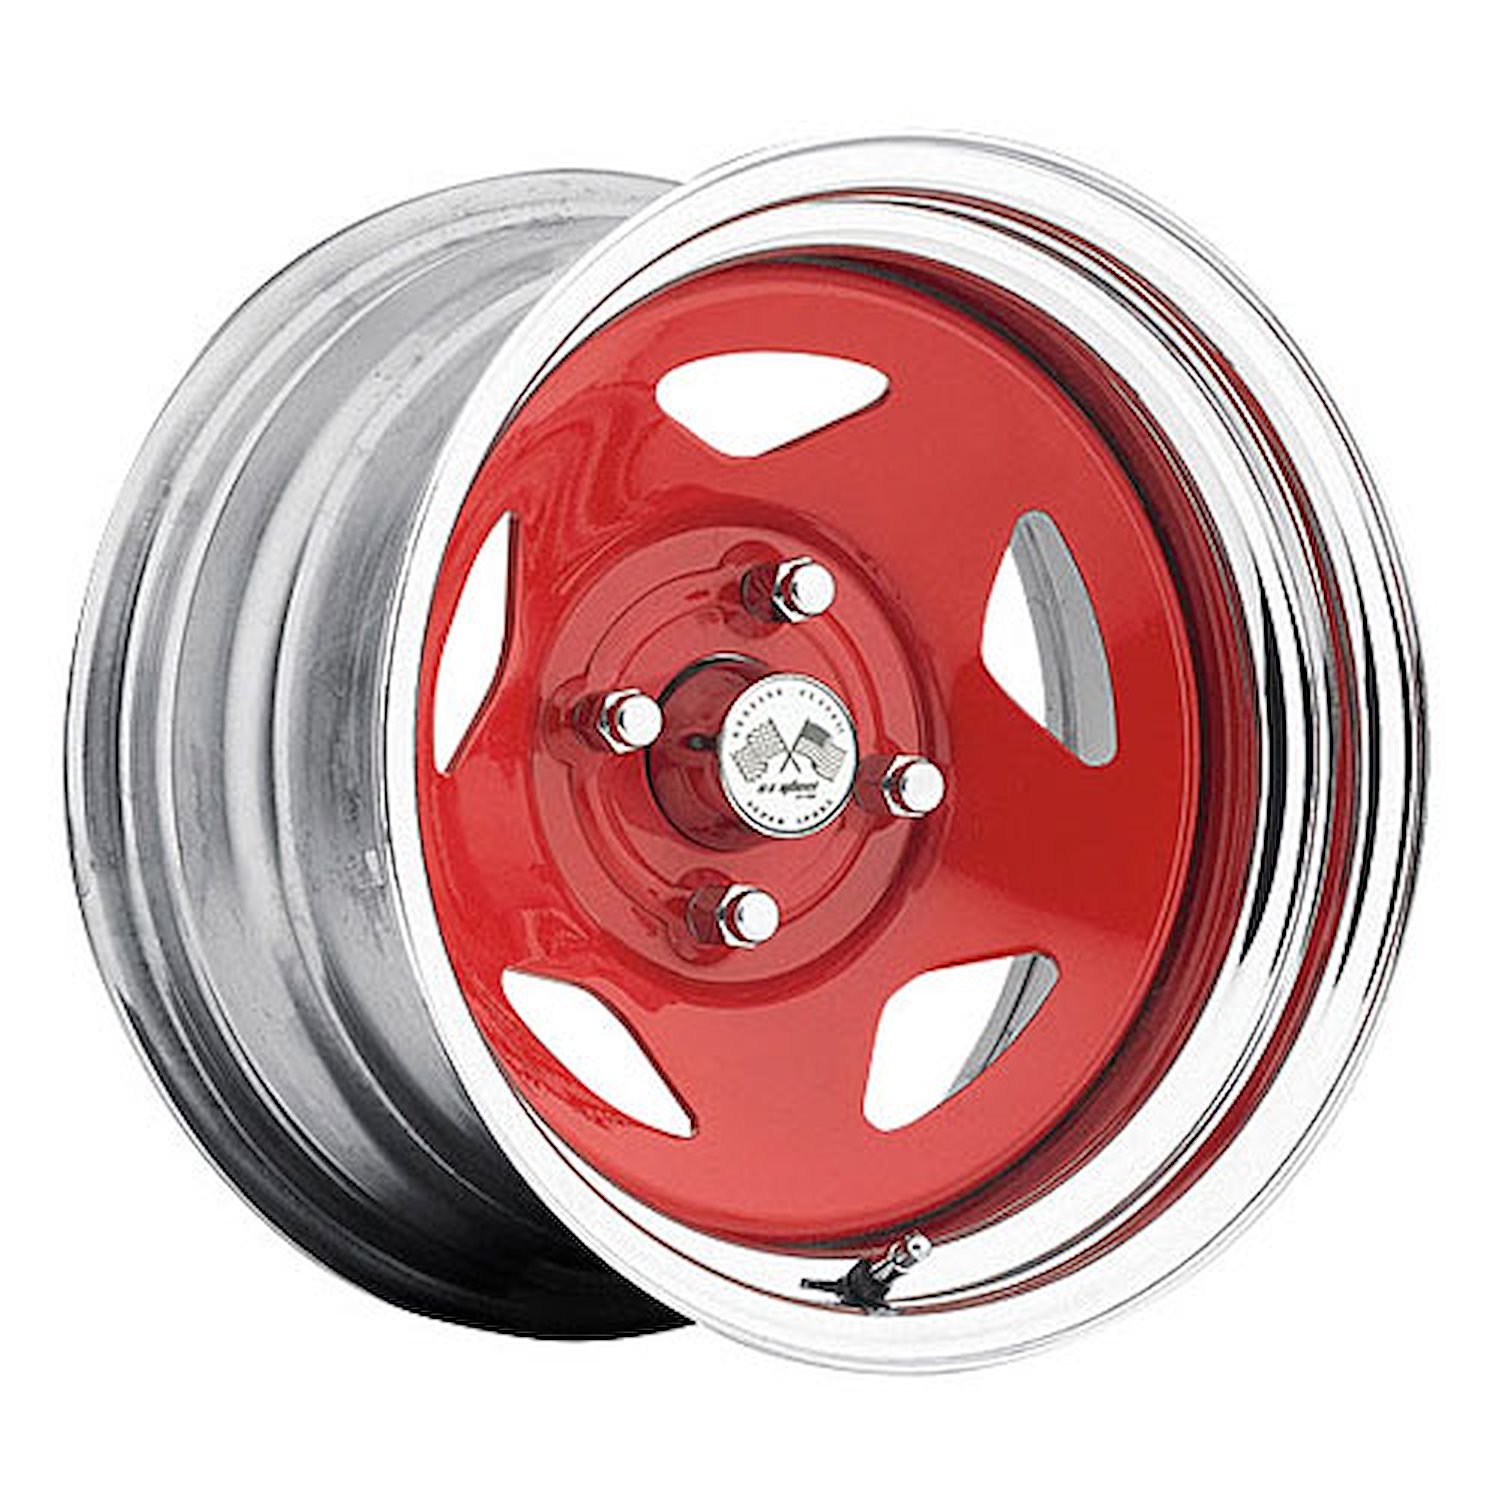 CHROME STAR FWD DRIFTER RED 15 x 7 4 x 45 Bolt Circle 4 Back Spacing 0 offset 266 Center Bore 1400 lbs Load Rating